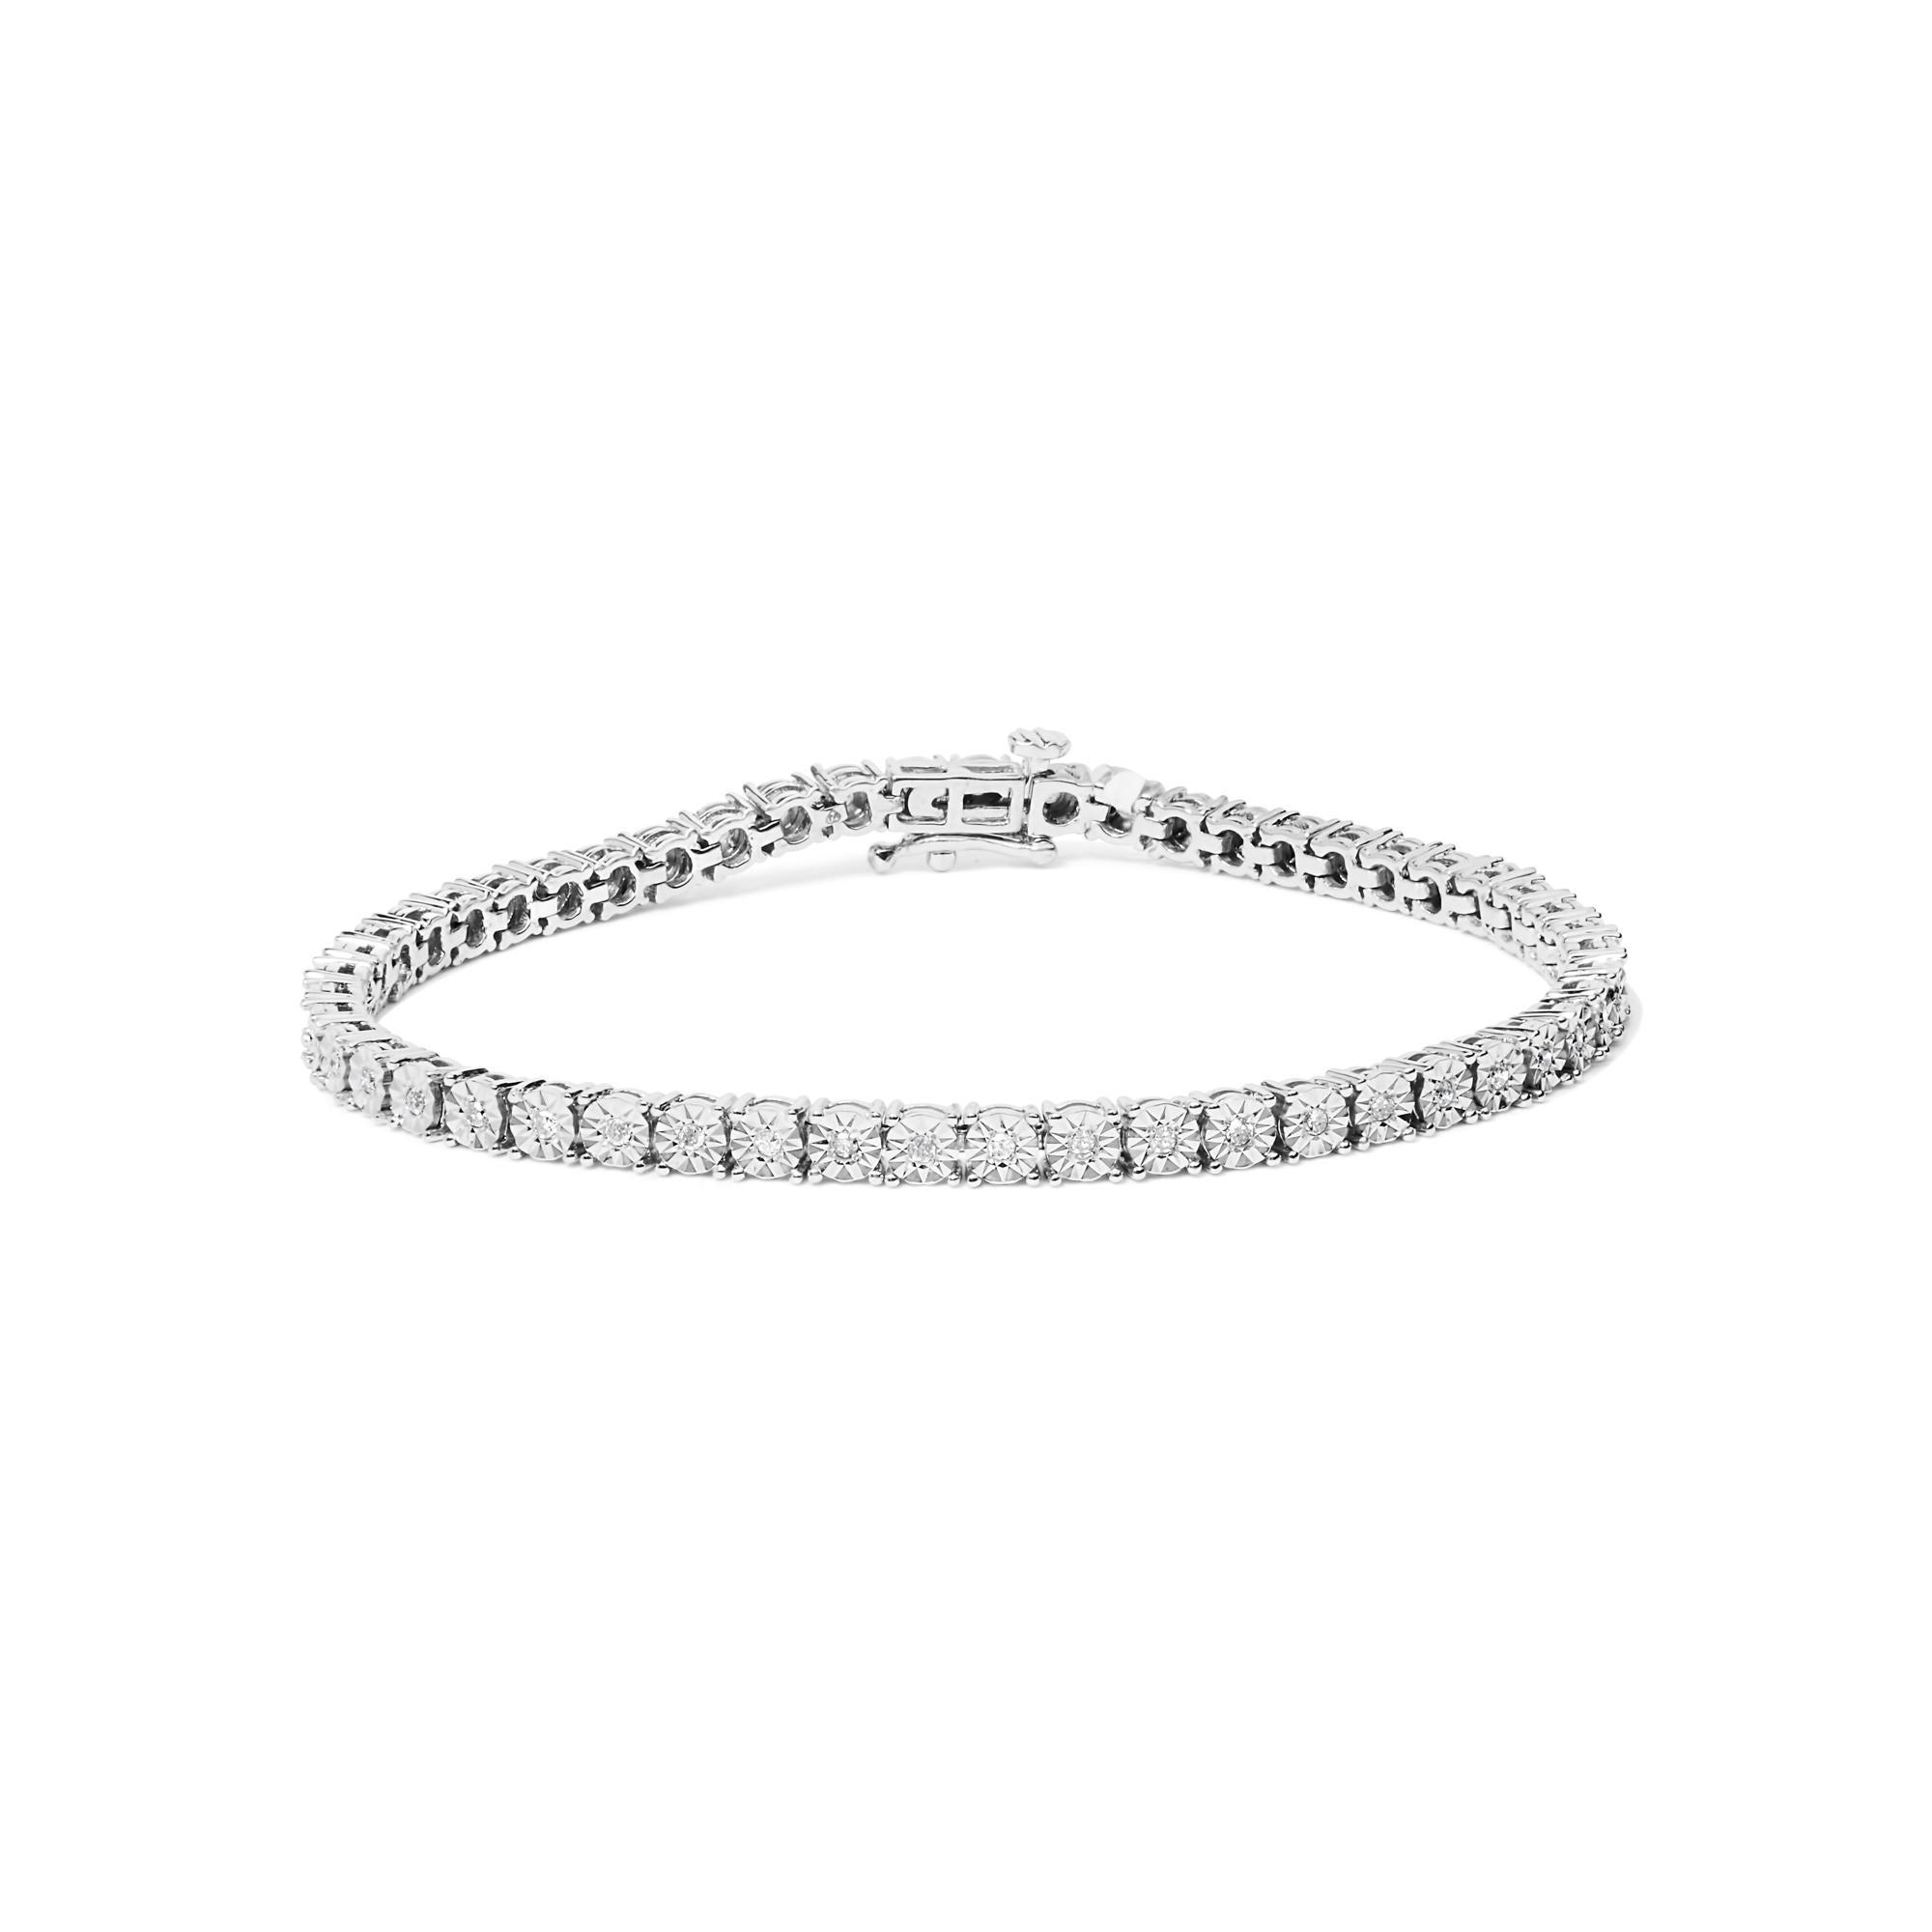 ''.925 Sterling Silver Lab Grown Diamond Illusion-Set Miracle Plate TENNIS BRACELET - 7.25'''' Inches''